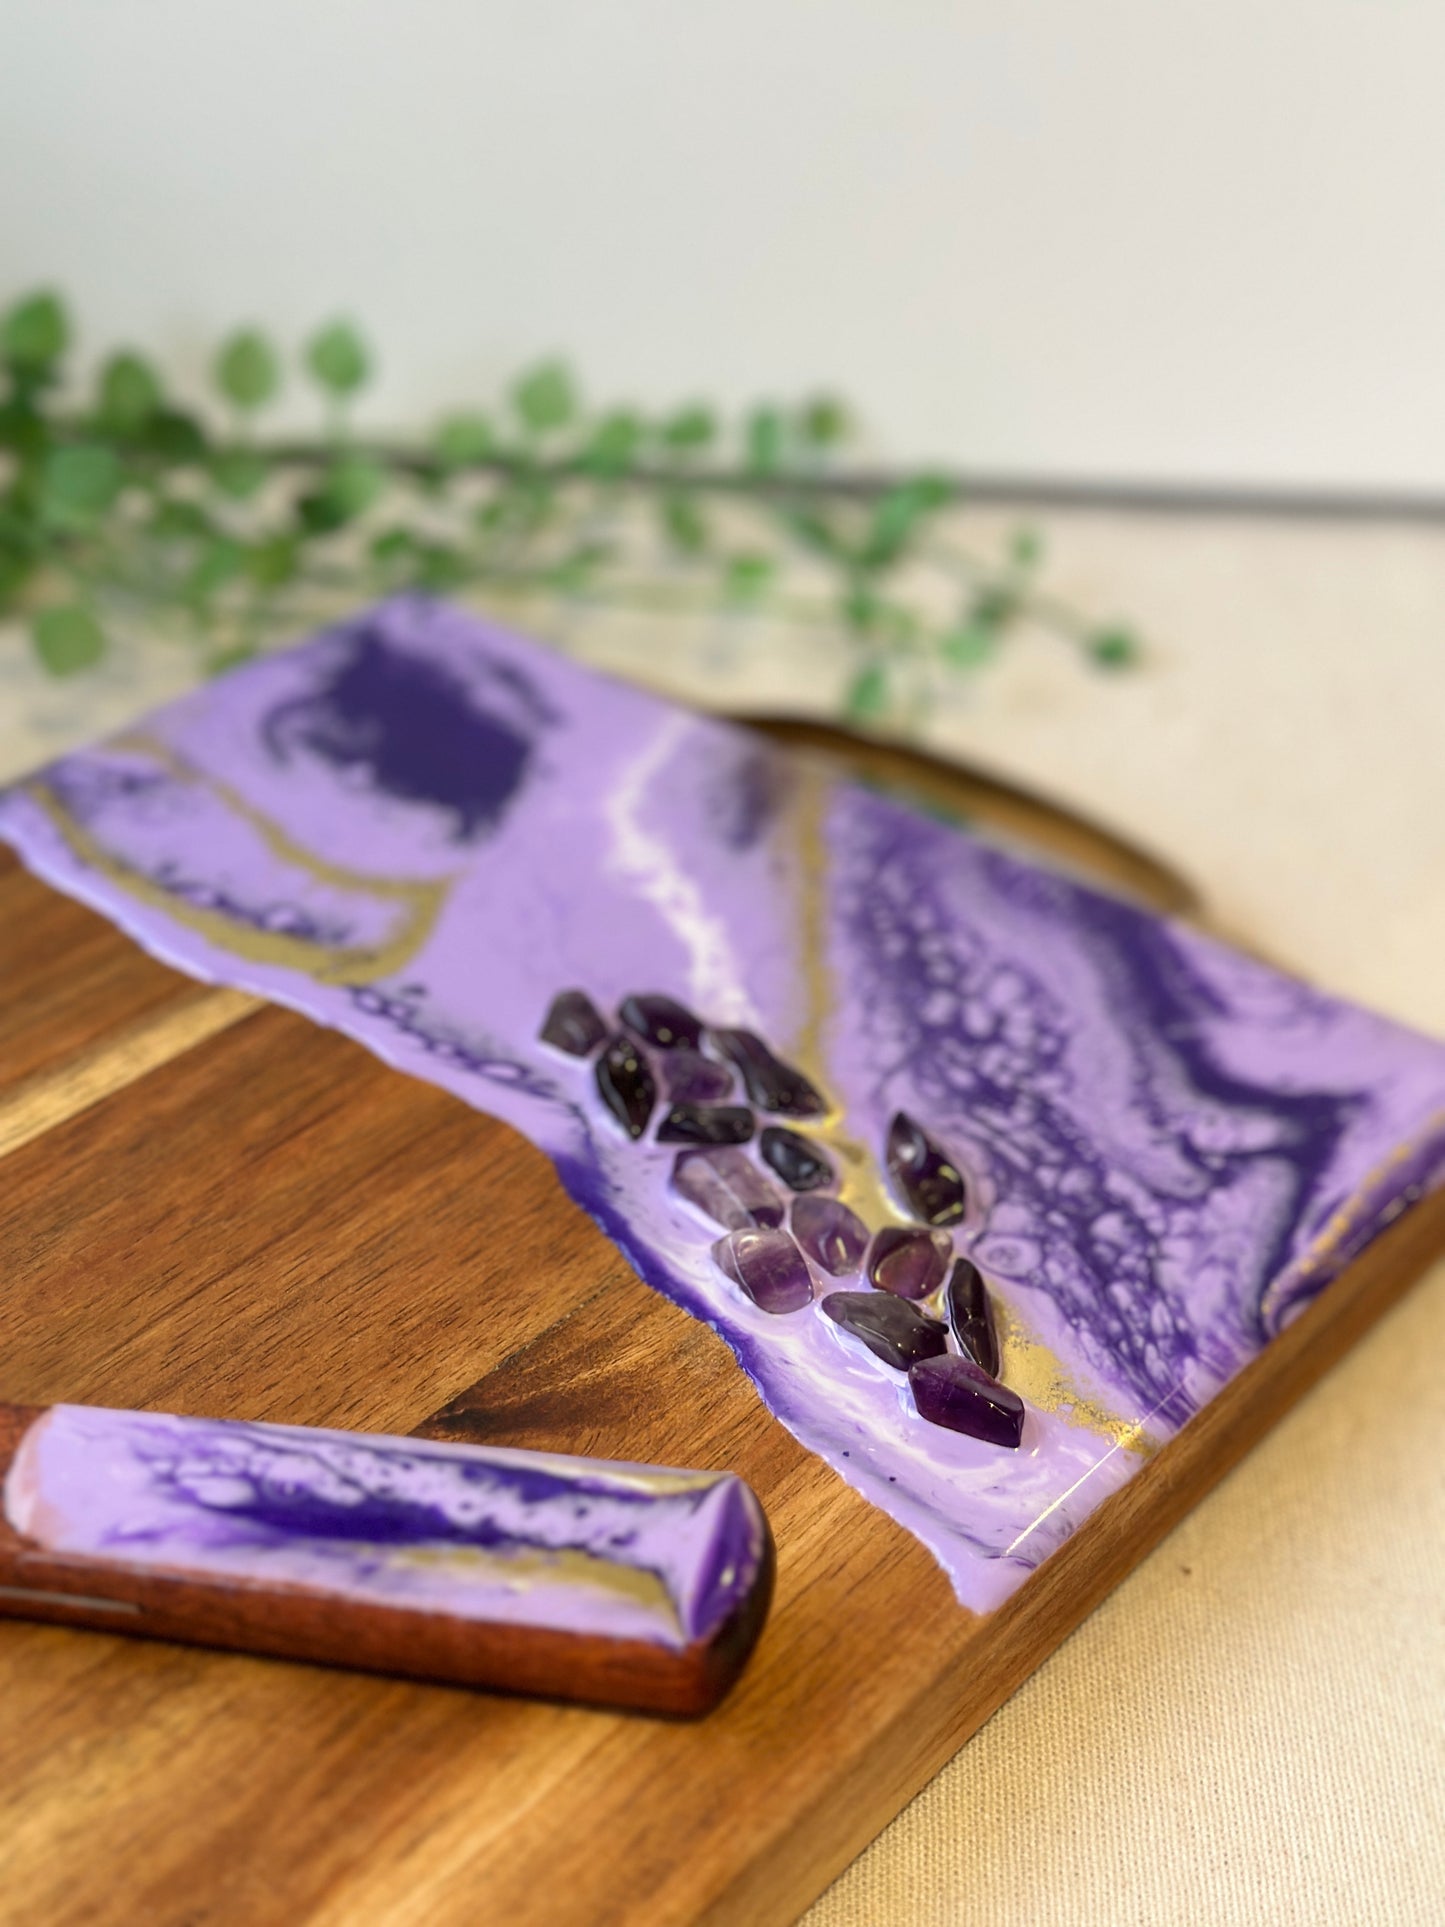 SERVING BOARD - purple resin with real amethyst crystals, serving board with FREE matching knife - READY TO POST